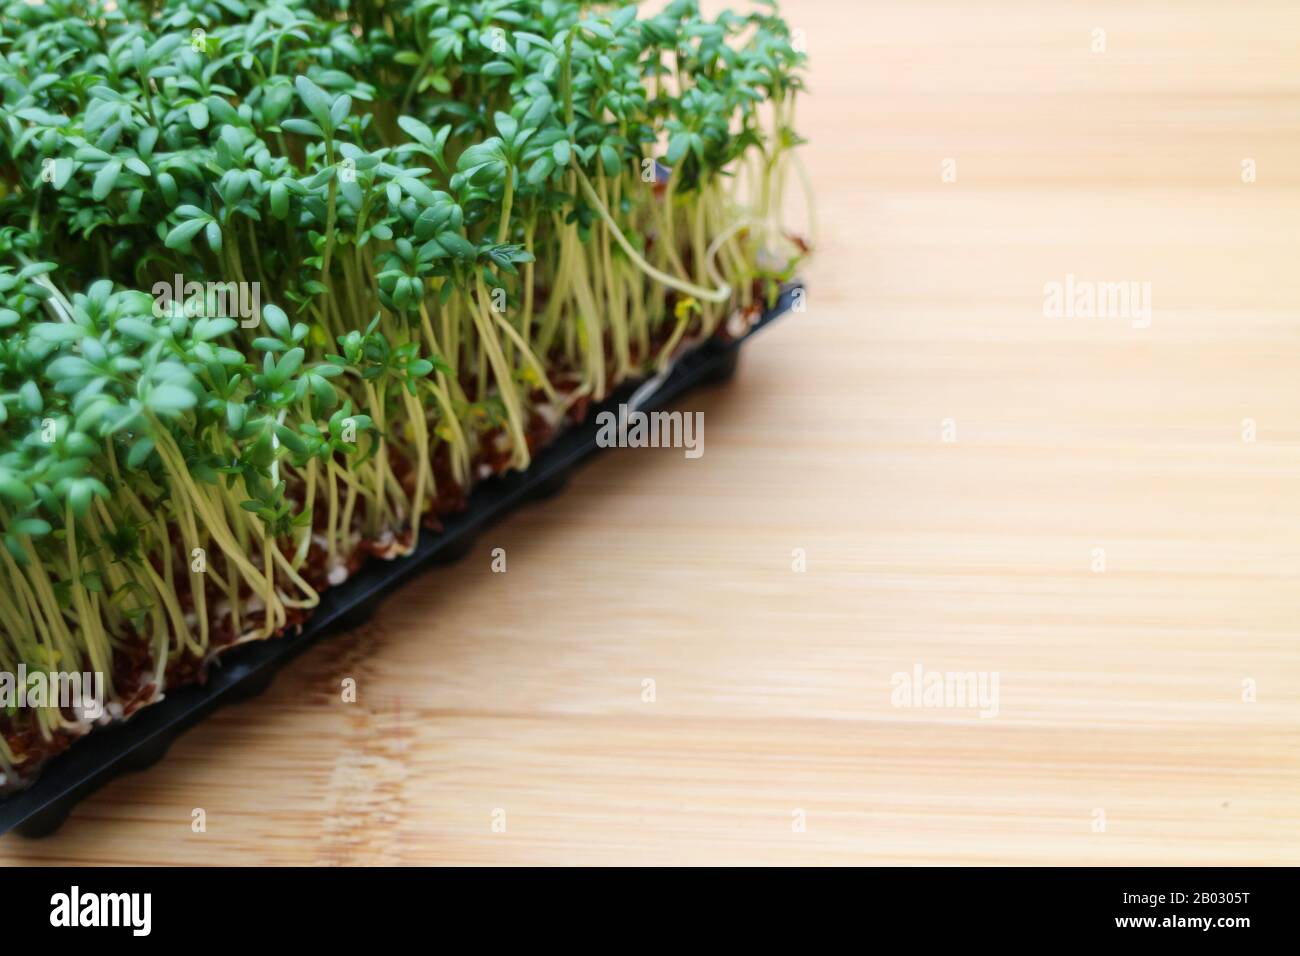 Fresh Garden Cress or Curly Cress (Lepidium sativum) in a container for growing on a wood cutting board background. Stock Photo